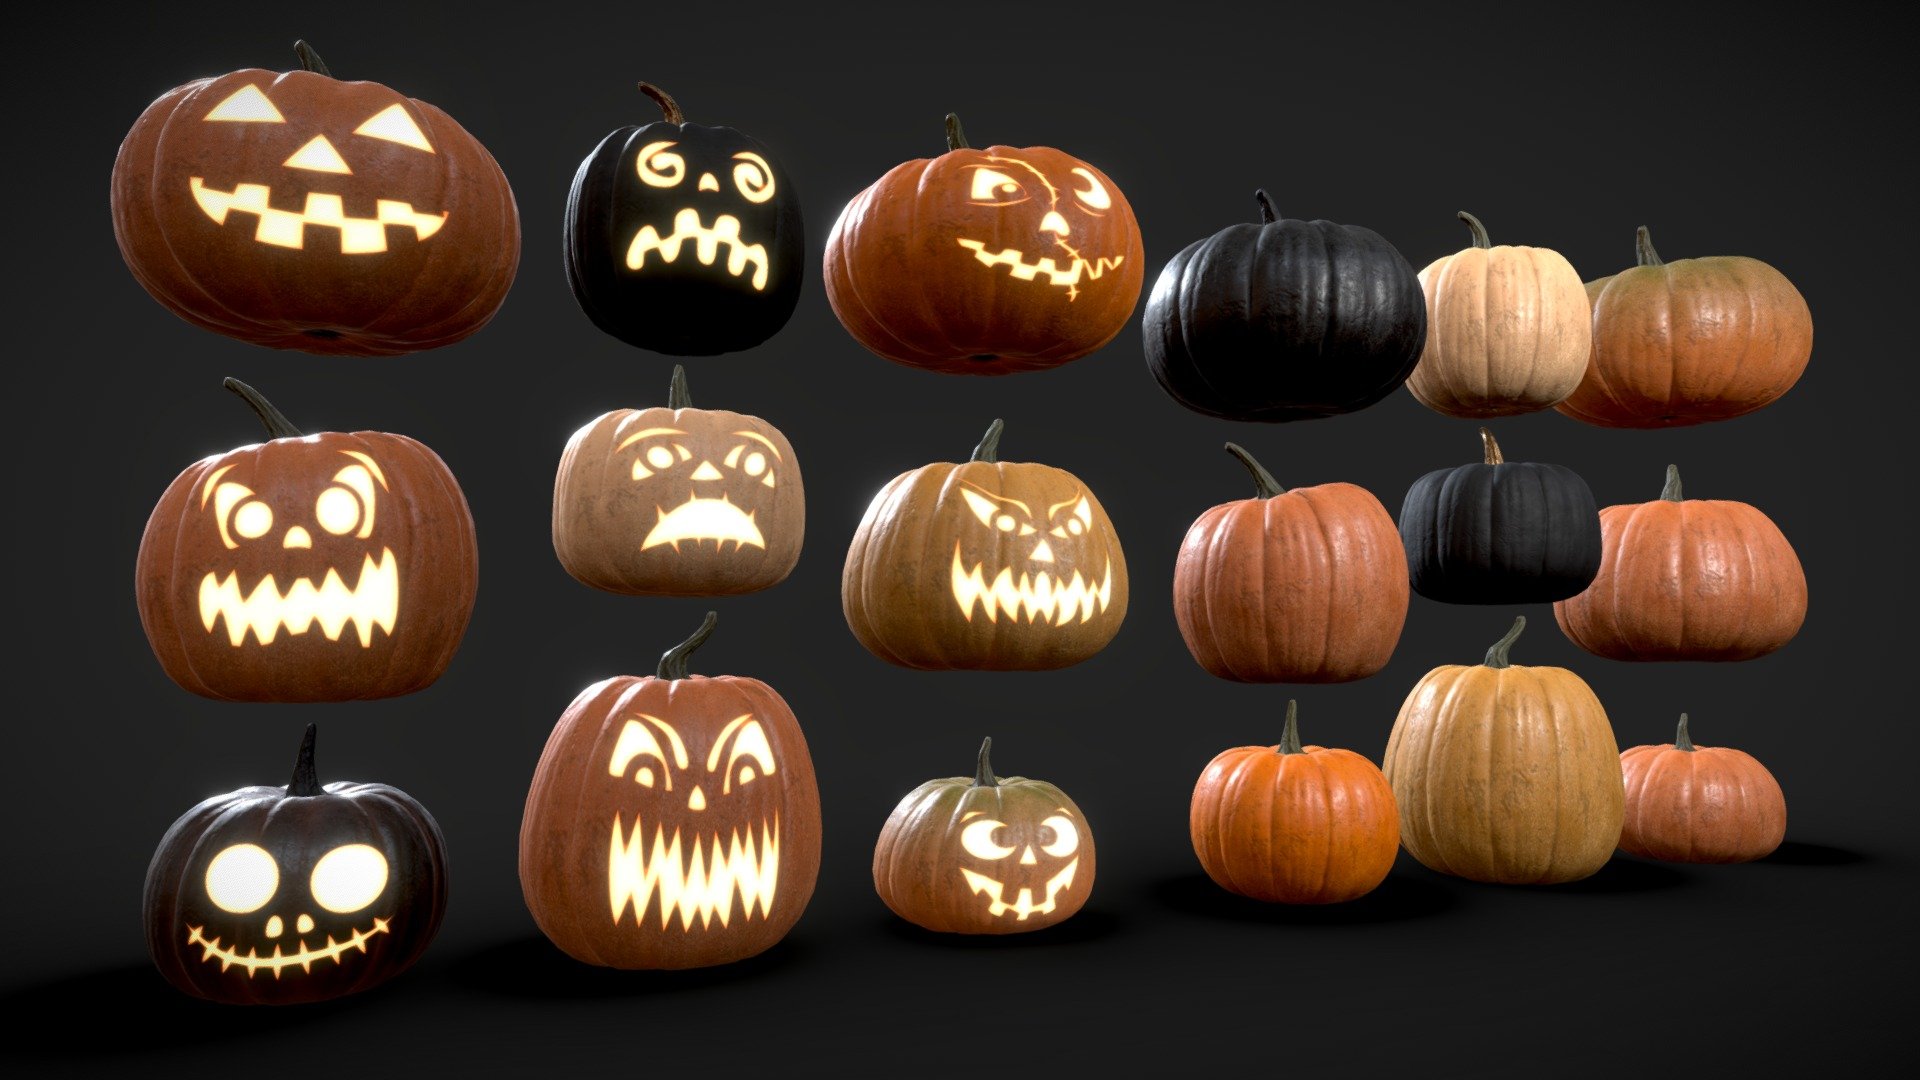 9 Jack-O'-Lanterns and pumpkins,
6 pumpkin material variations and 
3 levels of detail (LODs)

Every pumpkin mesh uses standardized UVs so you can easily swap between material variations if you prefer one pumpkin color over another.

*The dowloadable &ldquo;Additional File